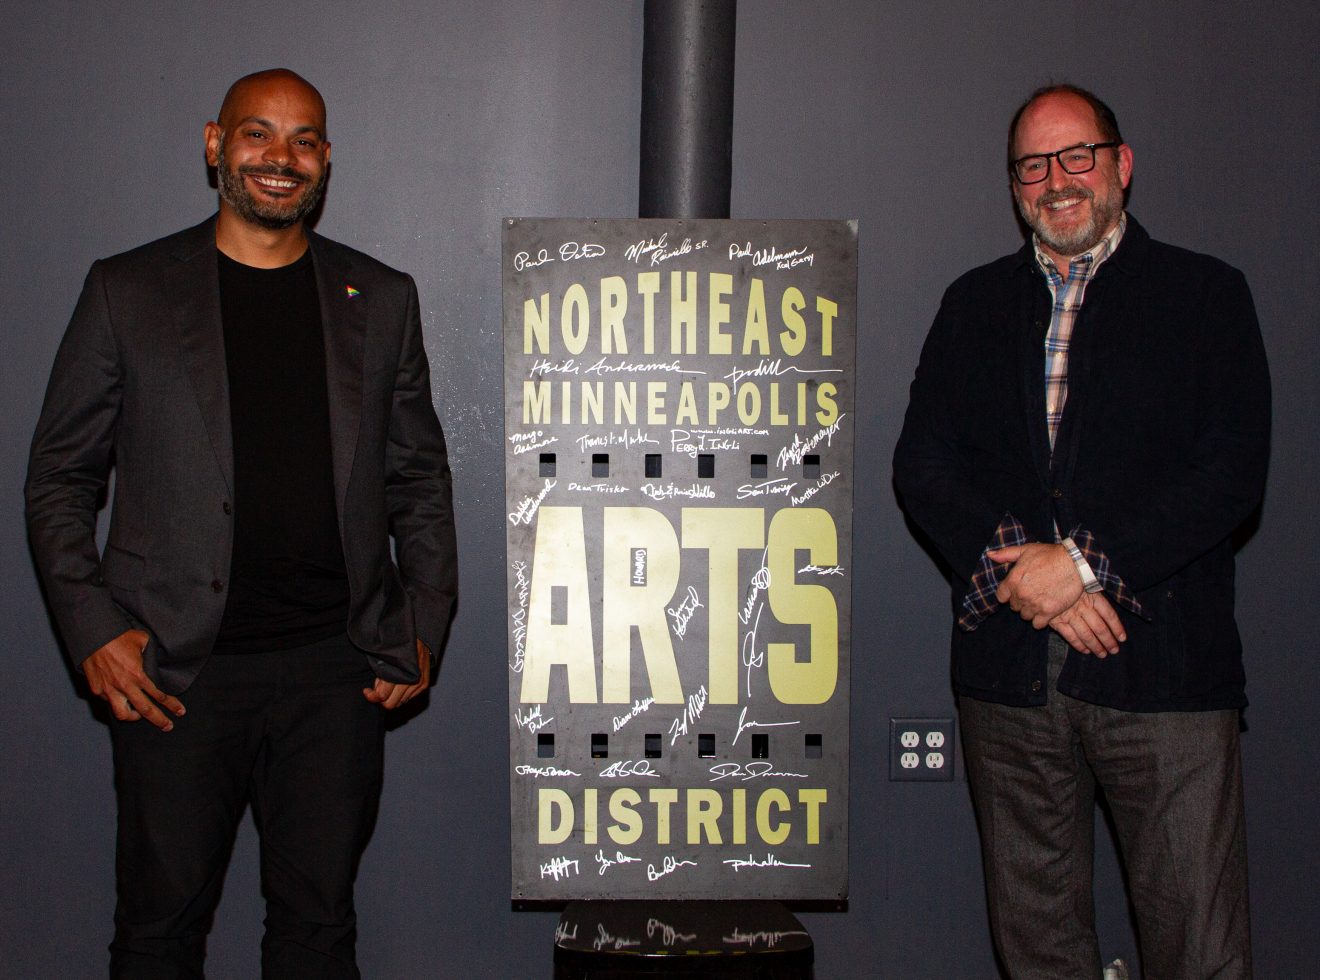 Arts District wants to work with elected officials to leverage the geography